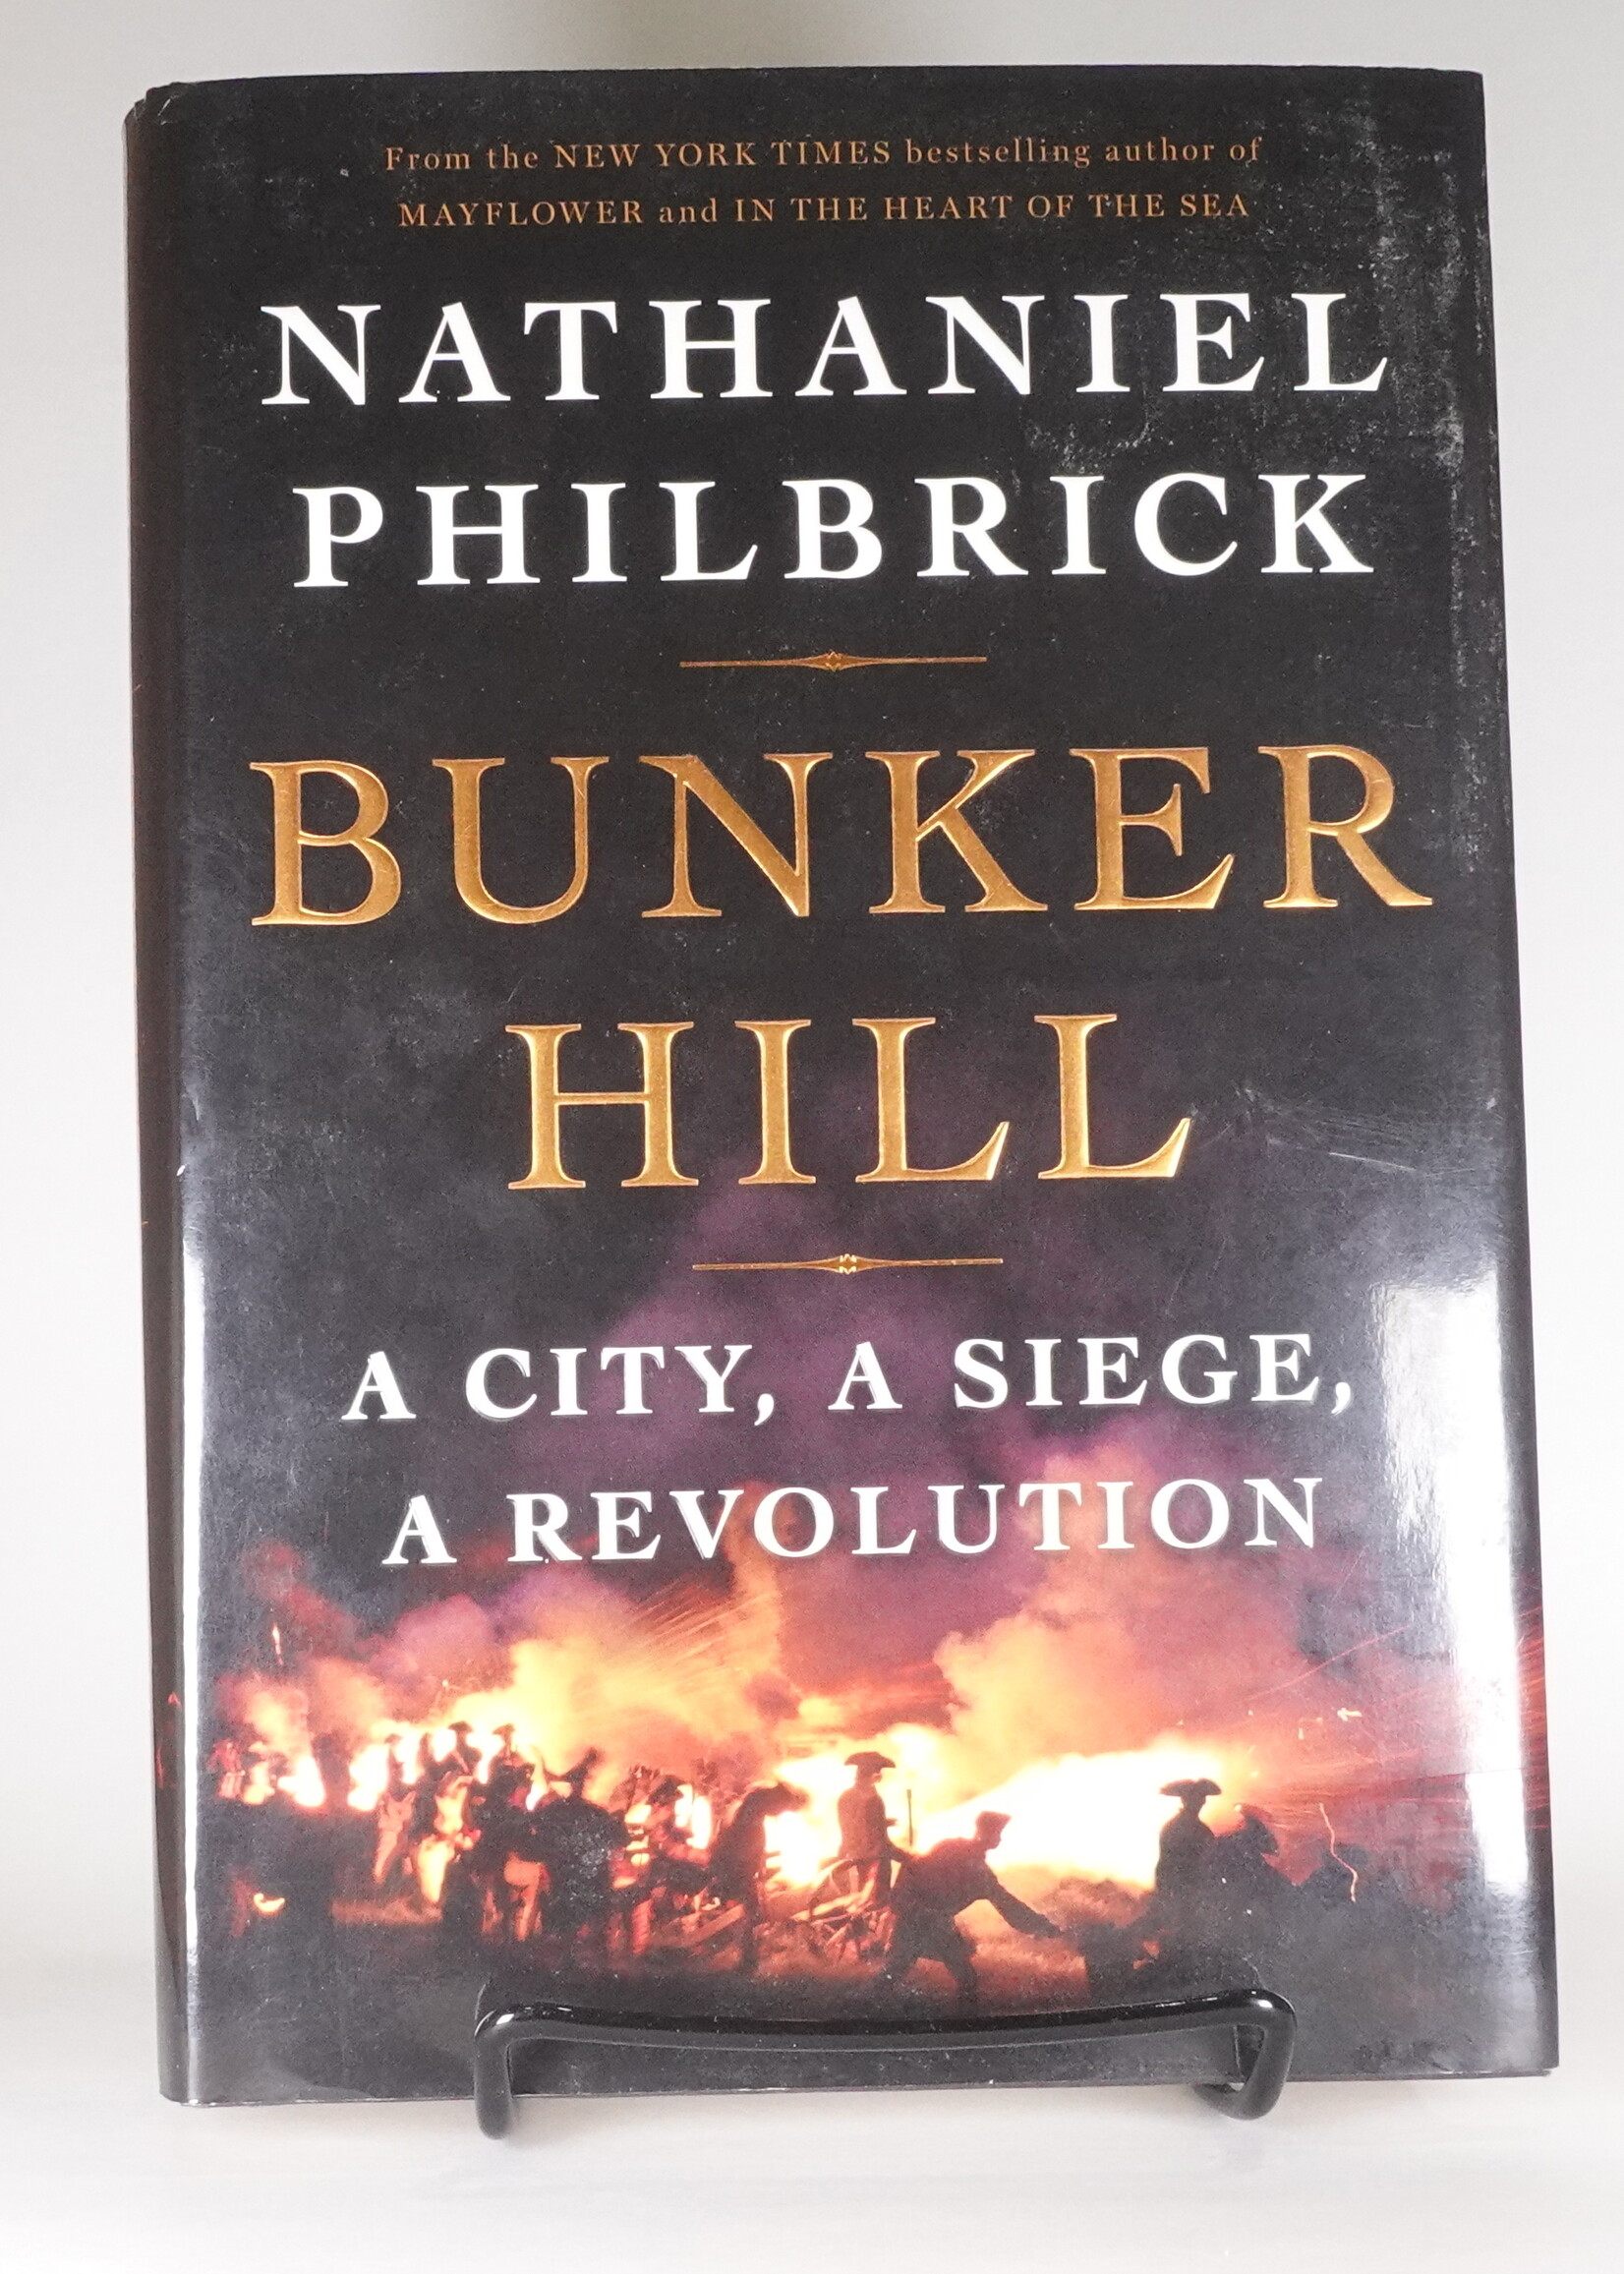 Viking Bunker Hill: A City, a Siege, a Revolution (Book #1 in the American Revolution Series)